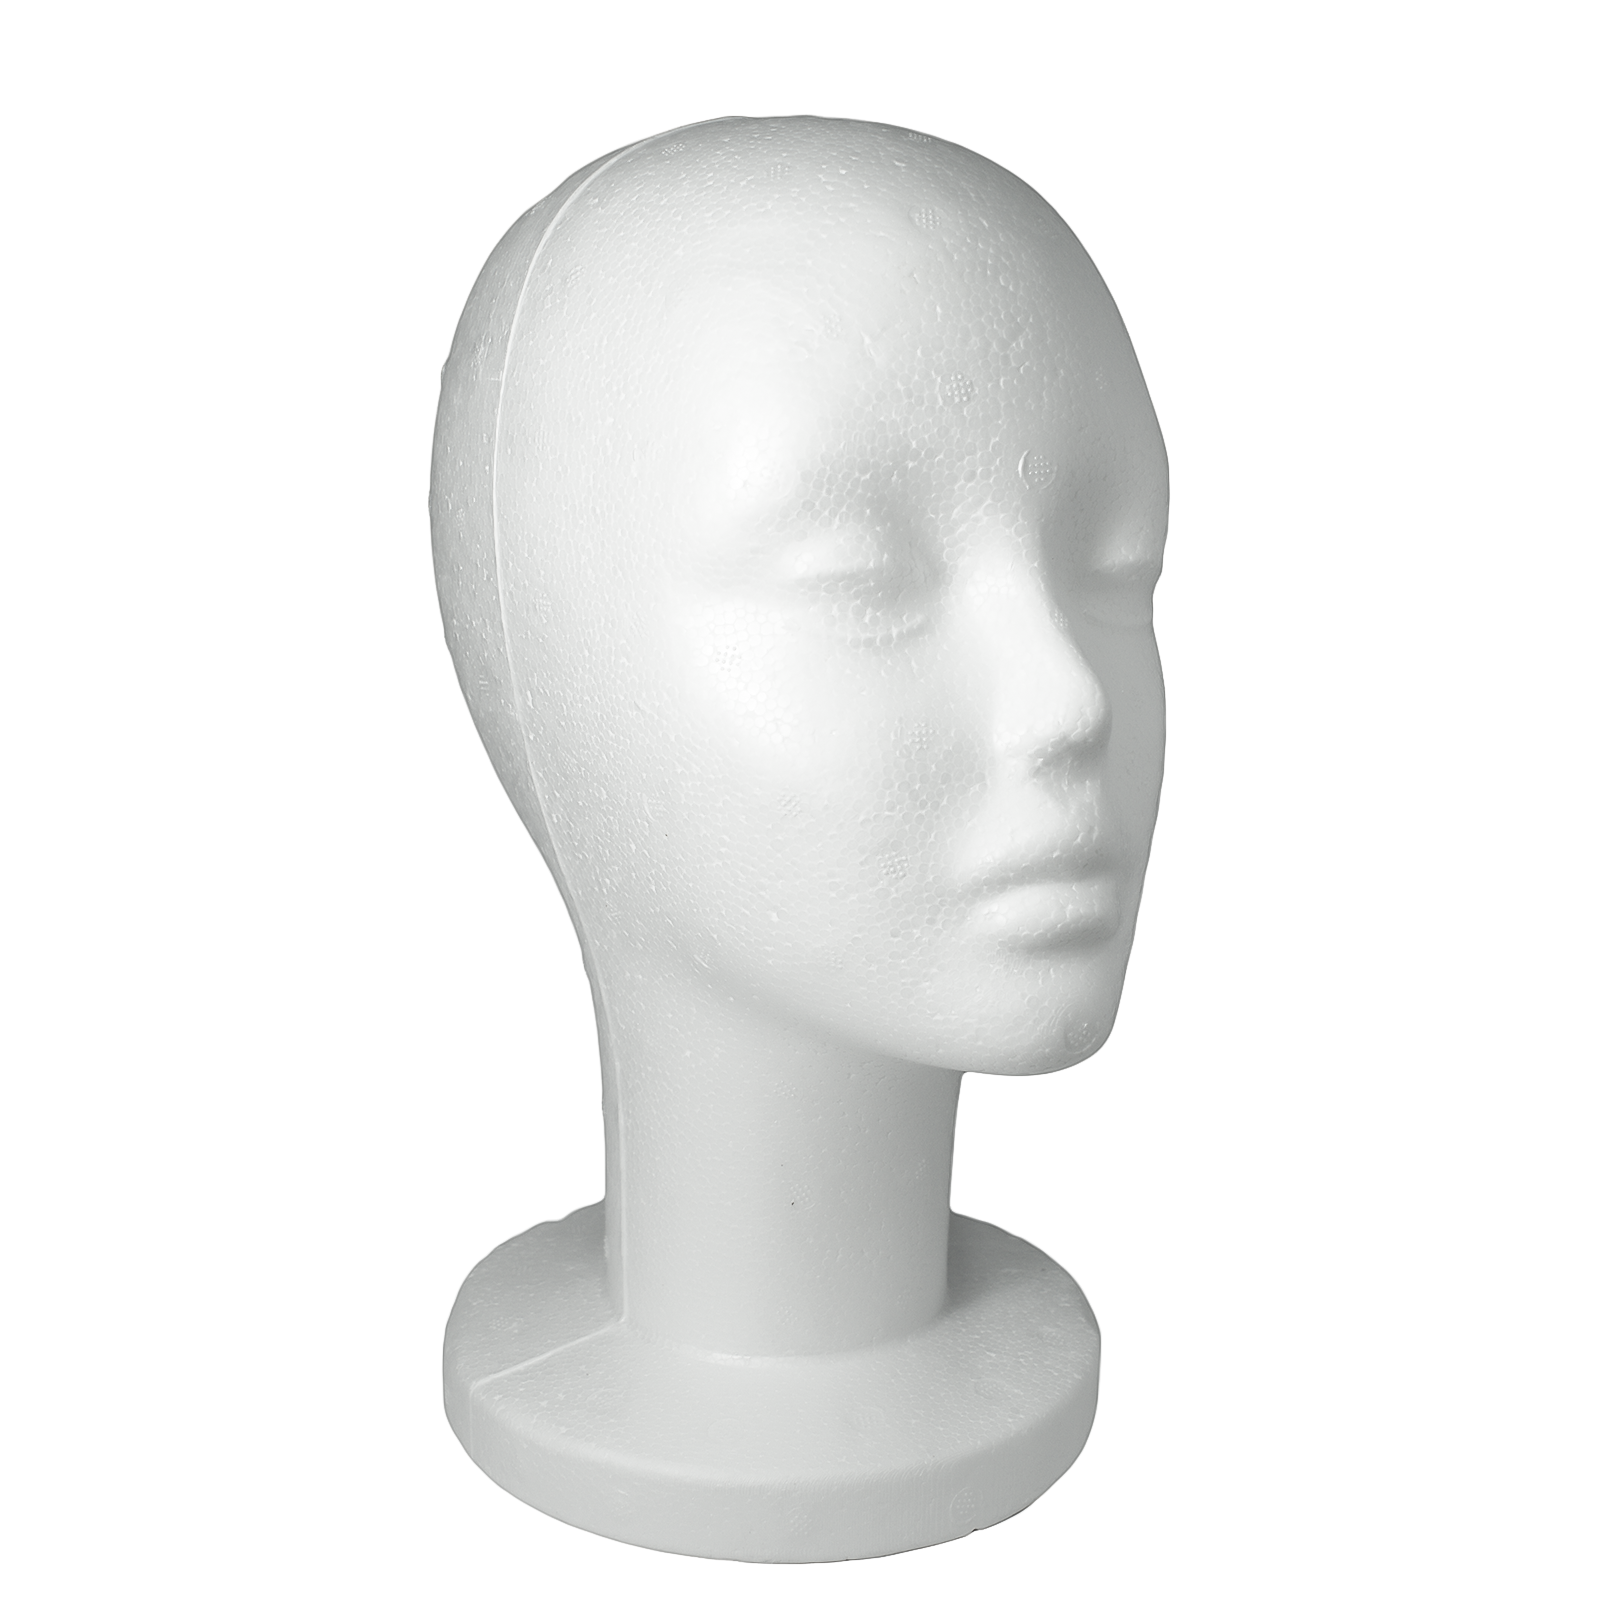 Mannequin Female Head Polystyrene Display For Hats & Accessories (POLYF)